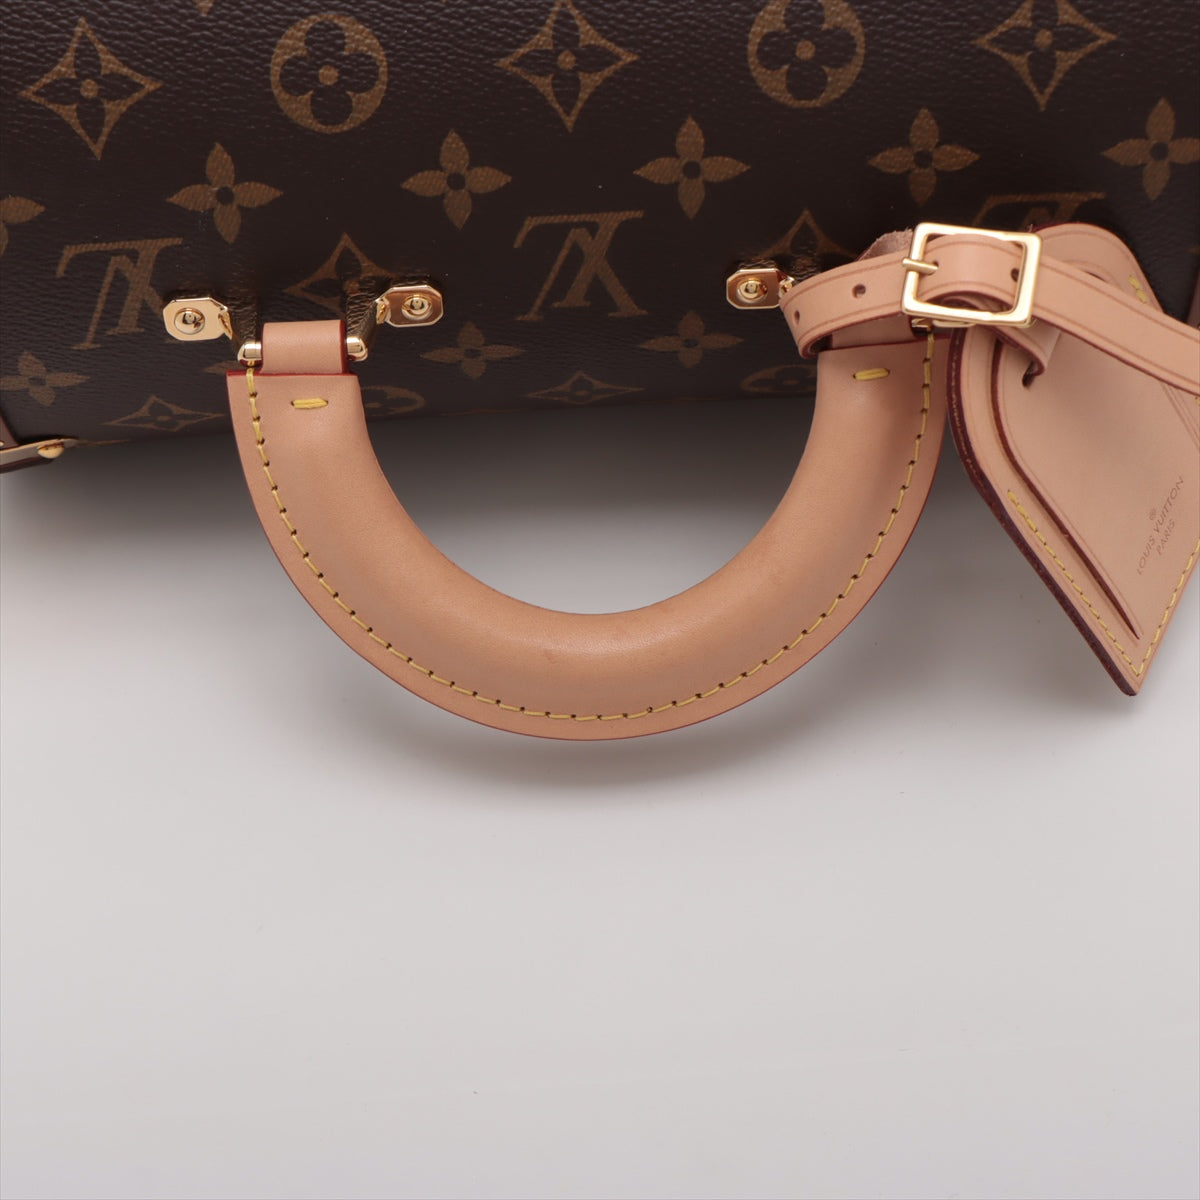 Louis Vuitton Monogram - - Trunk There was an RFID response